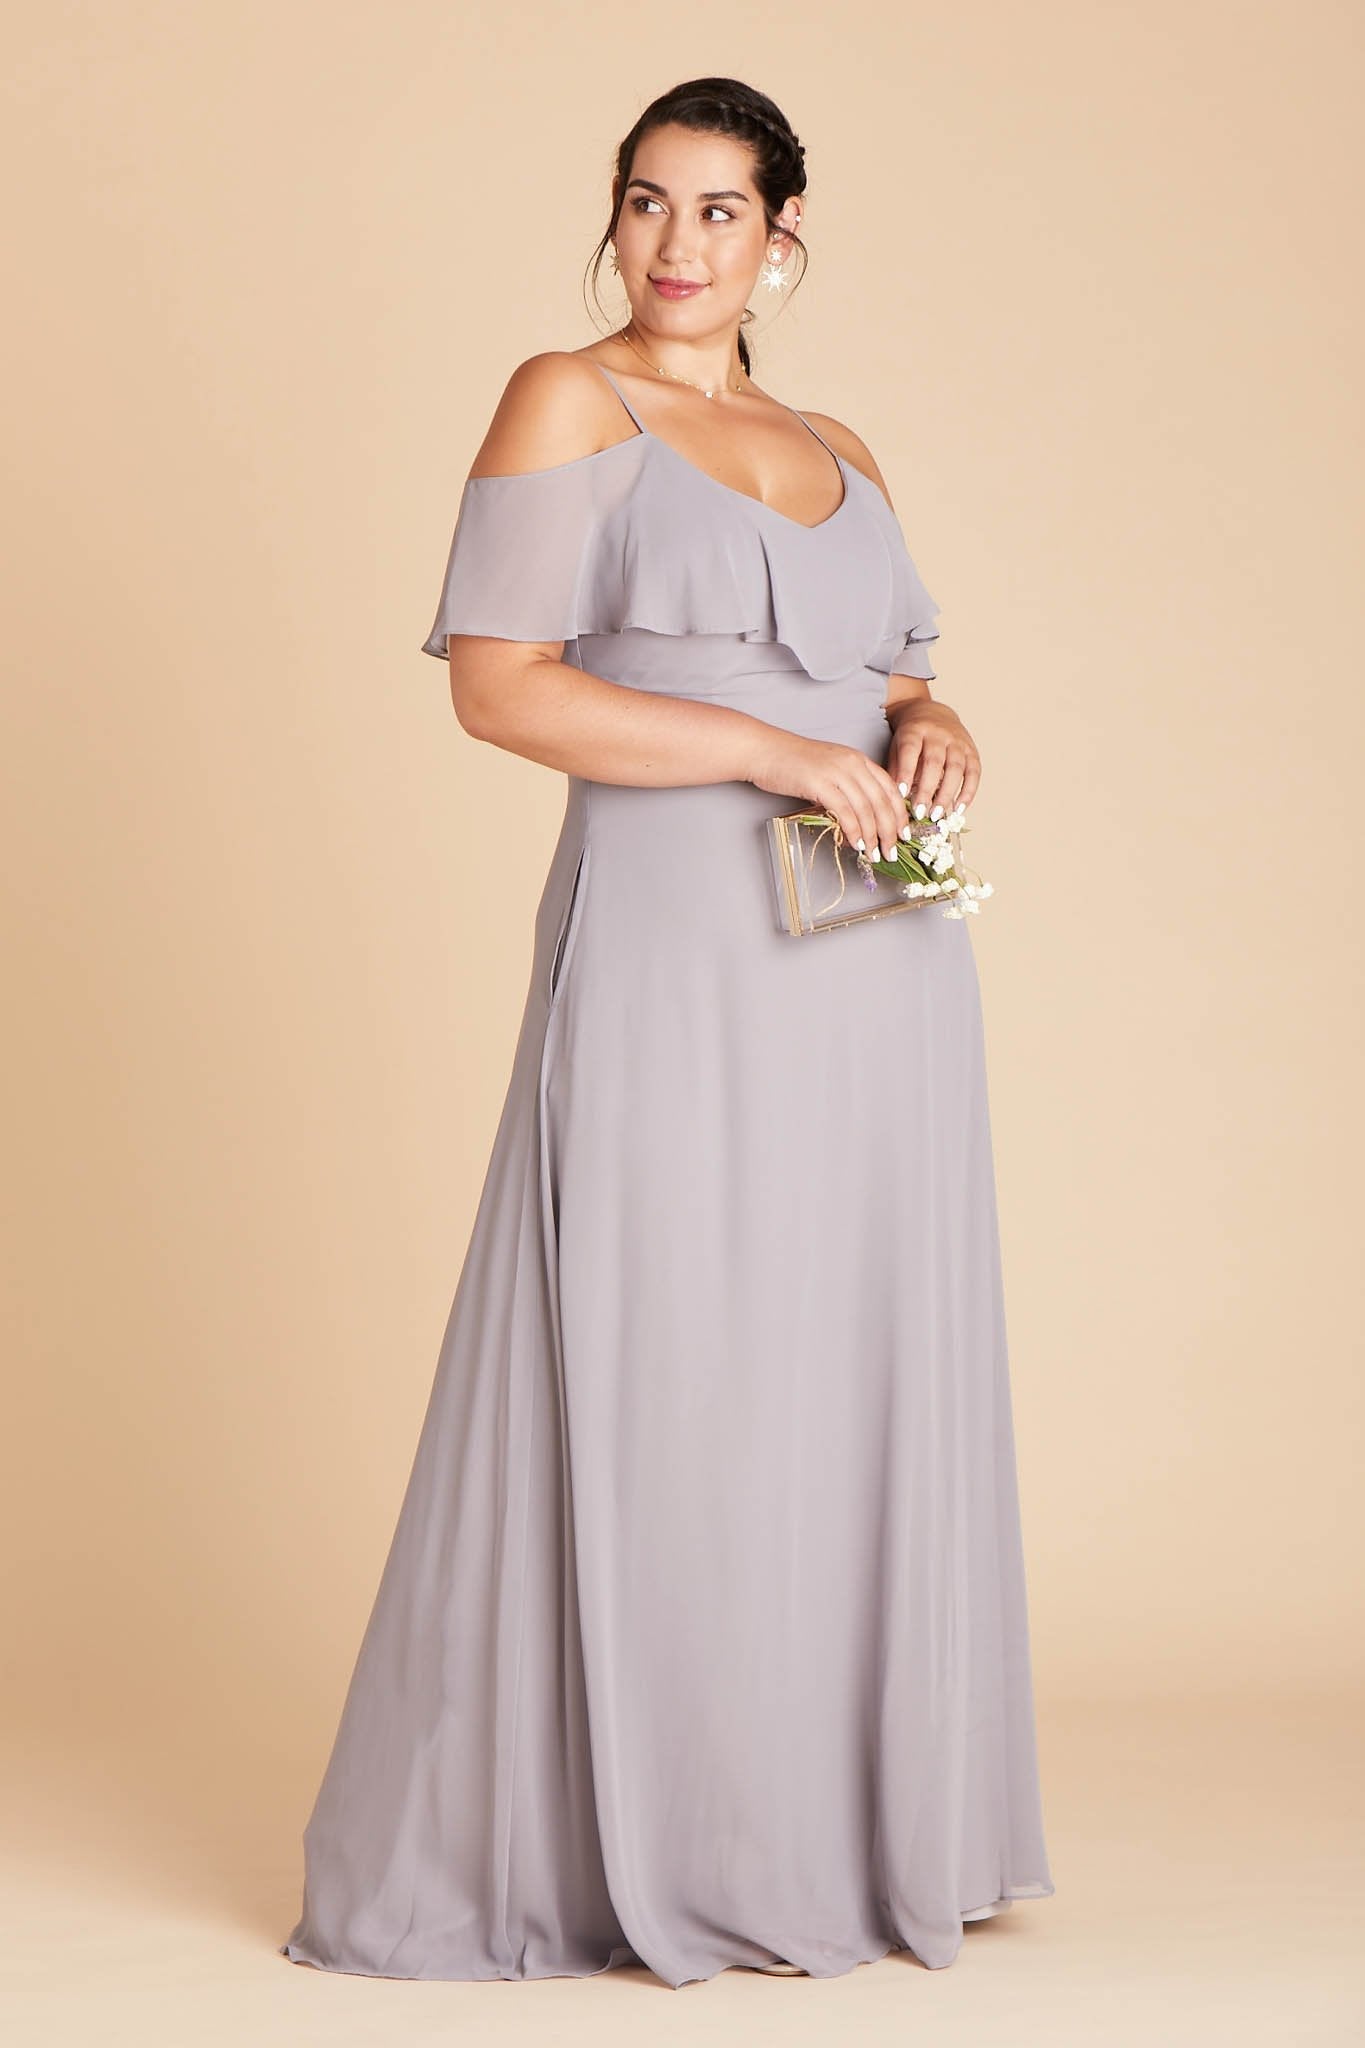 Jane convertible plus size bridesmaid dress in silver chiffon by Birdy Grey, front view